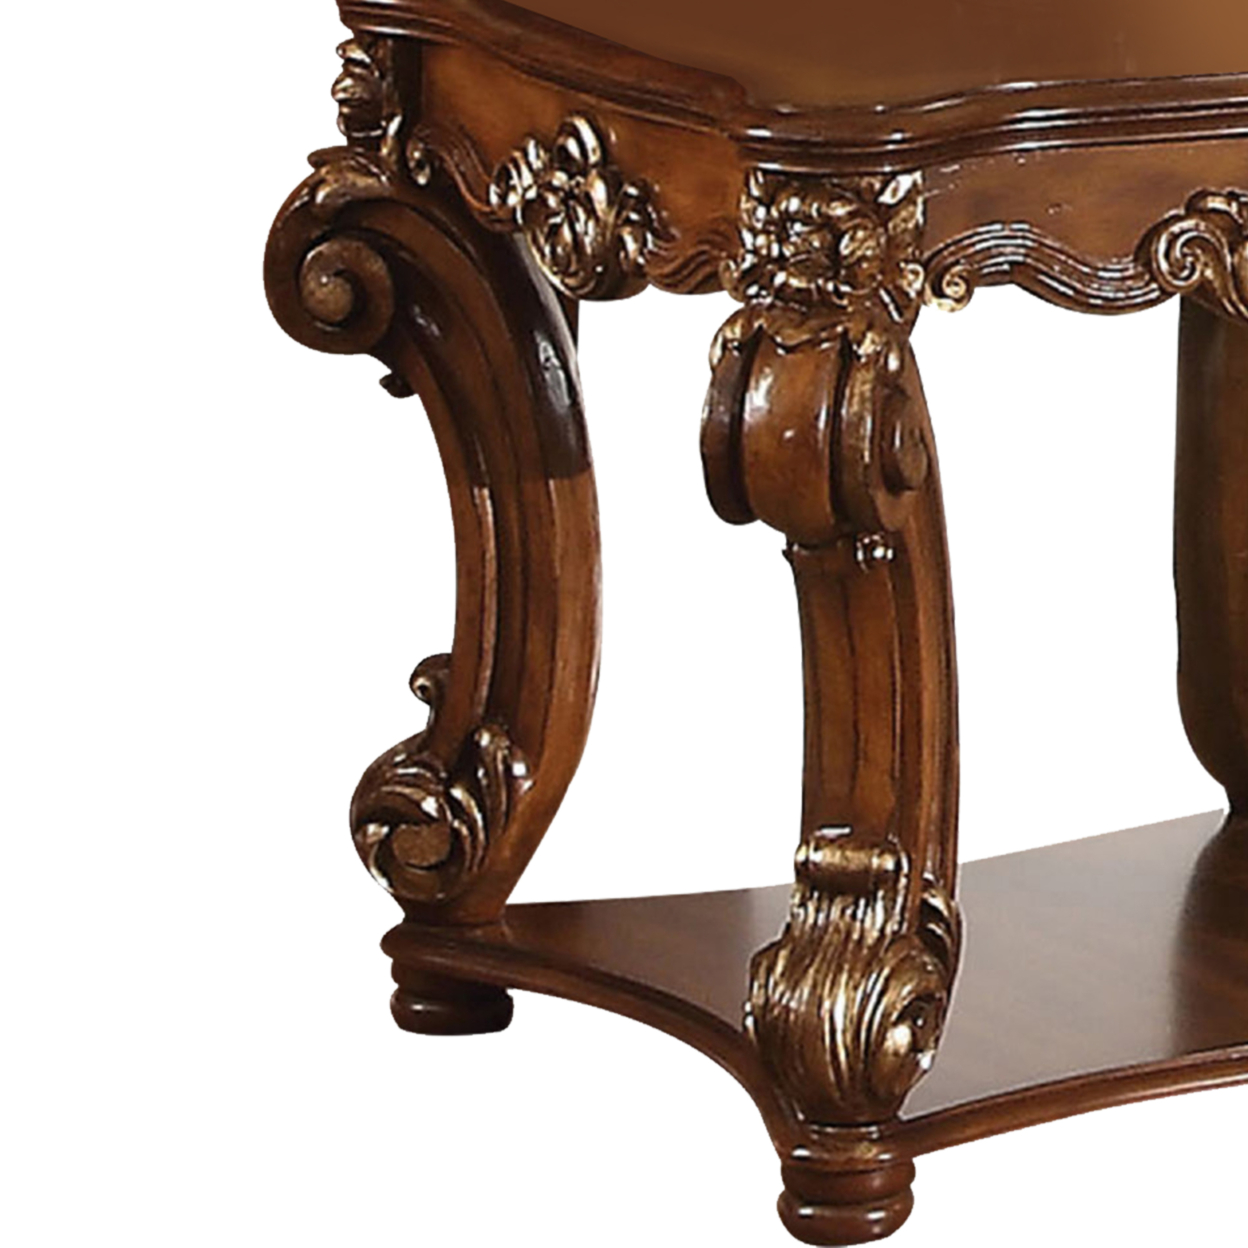 Square Top End Table With Scrolled Leg And Bottom Shelf, Cherry Brown- Saltoro Sherpi